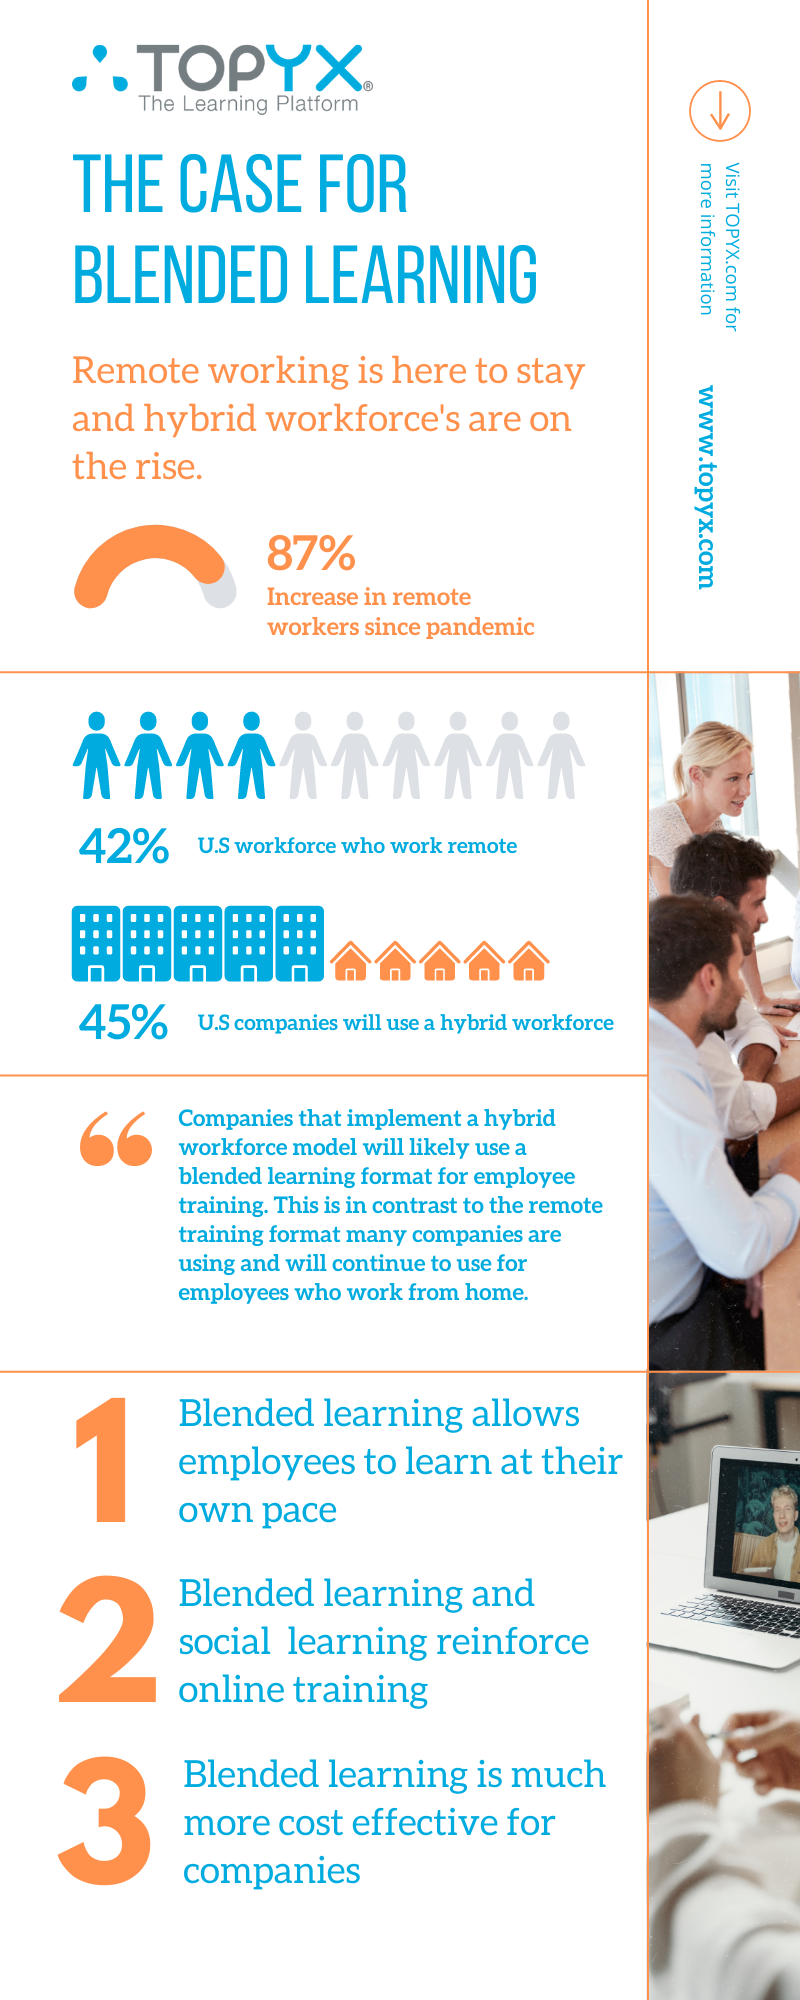 The Case for Blended Learning Infographic